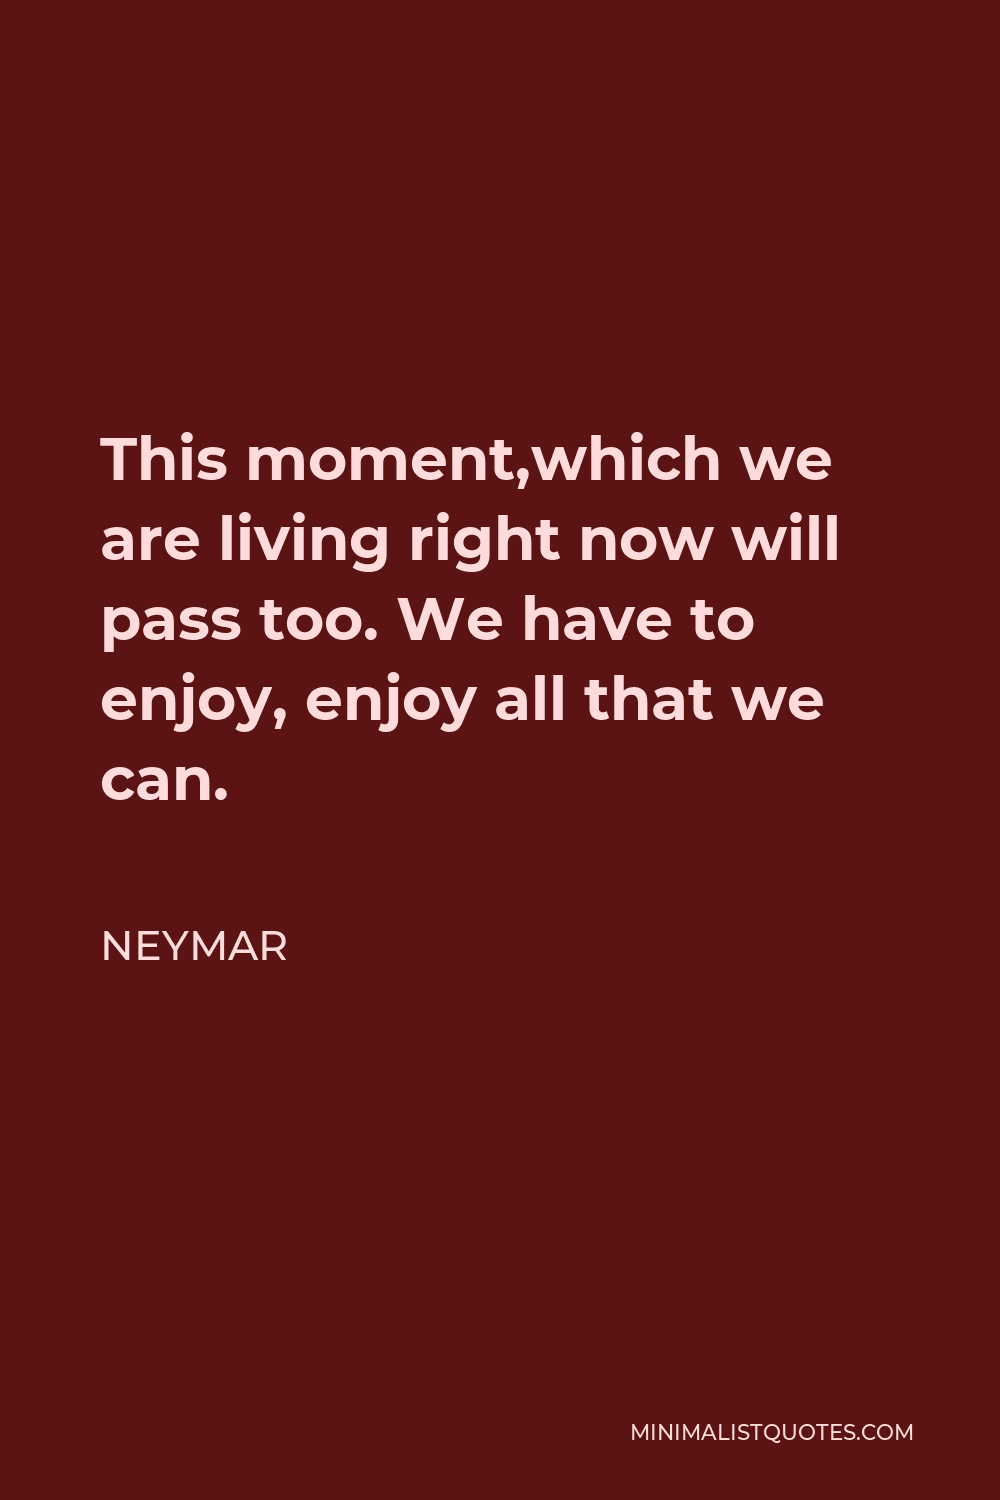 Neymar Quote - This moment,which we are living right now will pass too. We have to enjoy, enjoy all that we can.